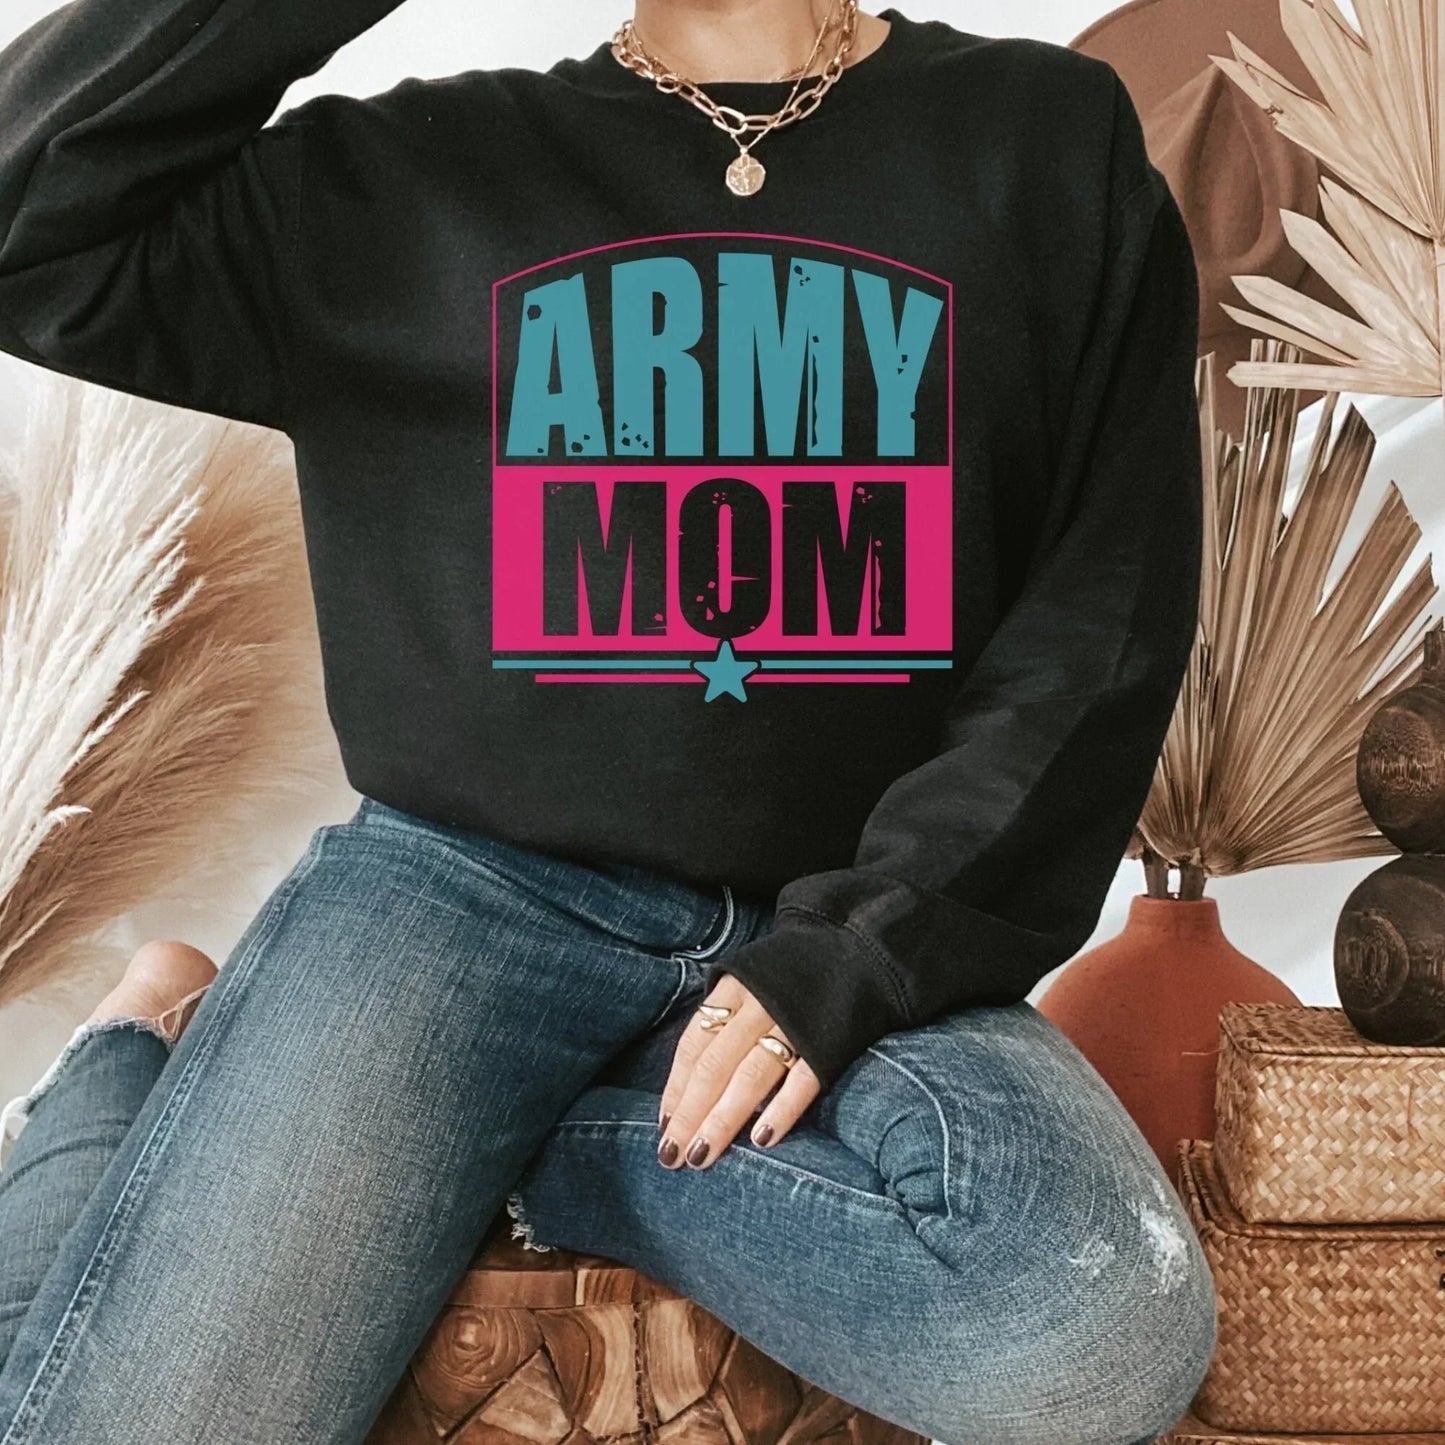 Army Mom Shirt, Army Wife, Military Mom Shirt, Military Wife Sweatshirt, Army Mom Gift, Air Force Mom, Support our troops, Navy Mom, US Army HMDesignStudioUS